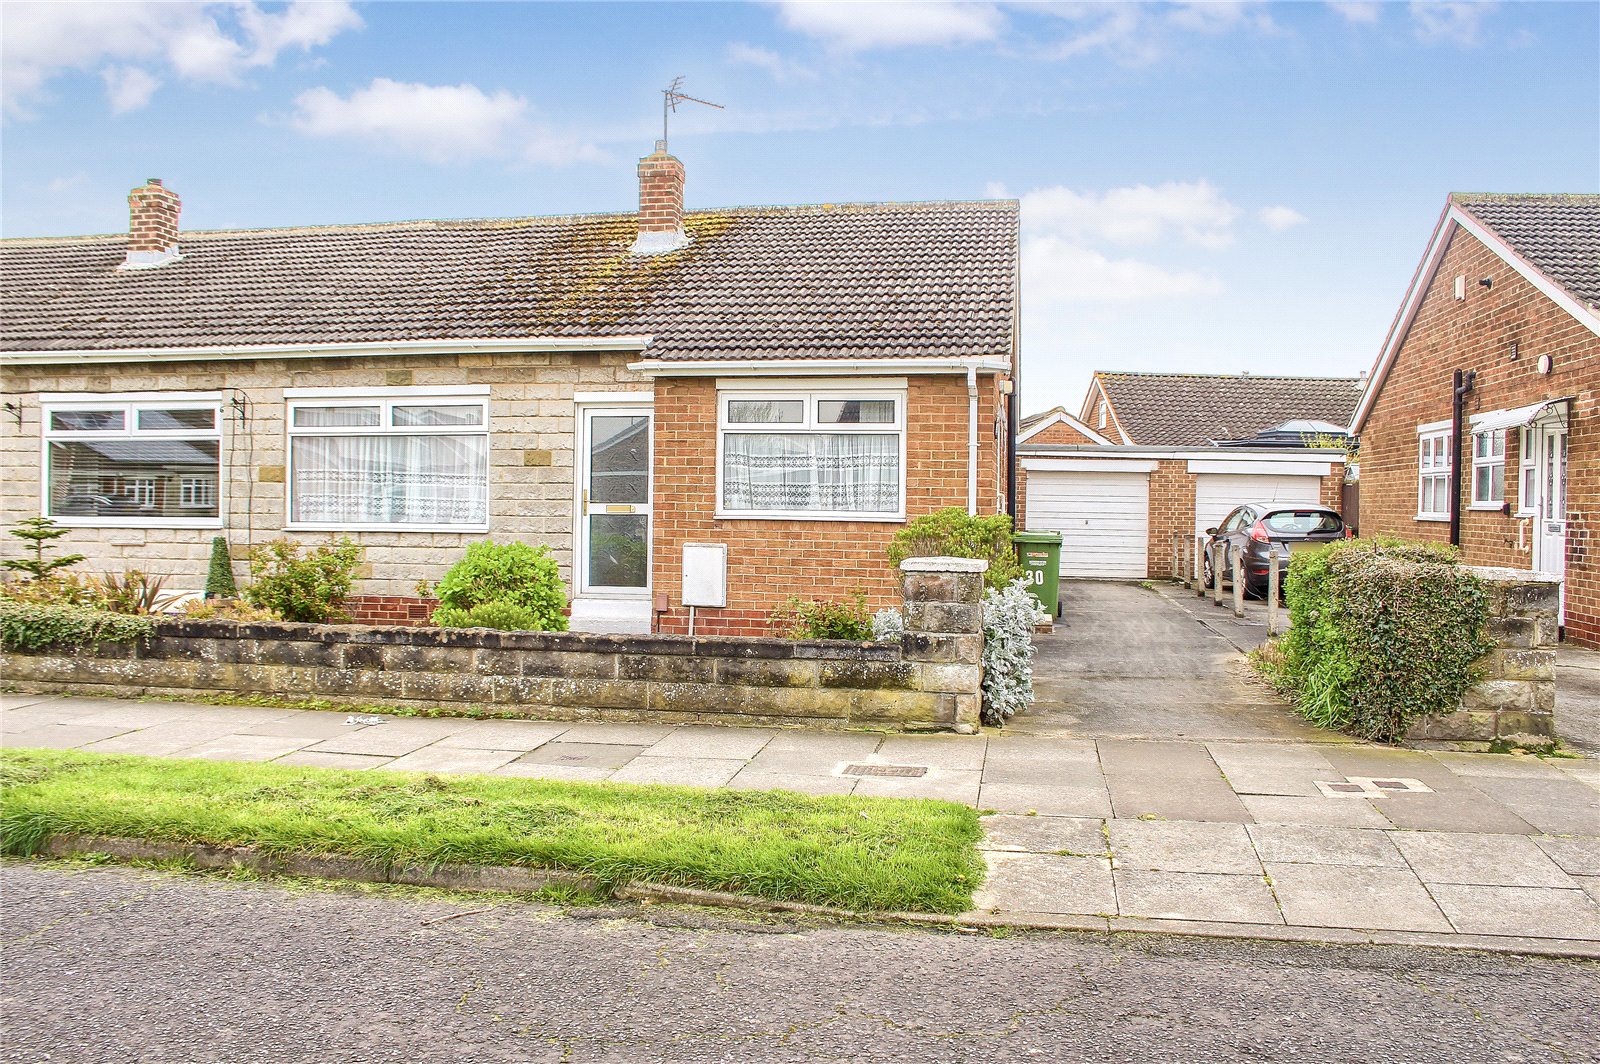 3 bed bungalow for sale in Newton Drive, Thornaby - Property Image 1